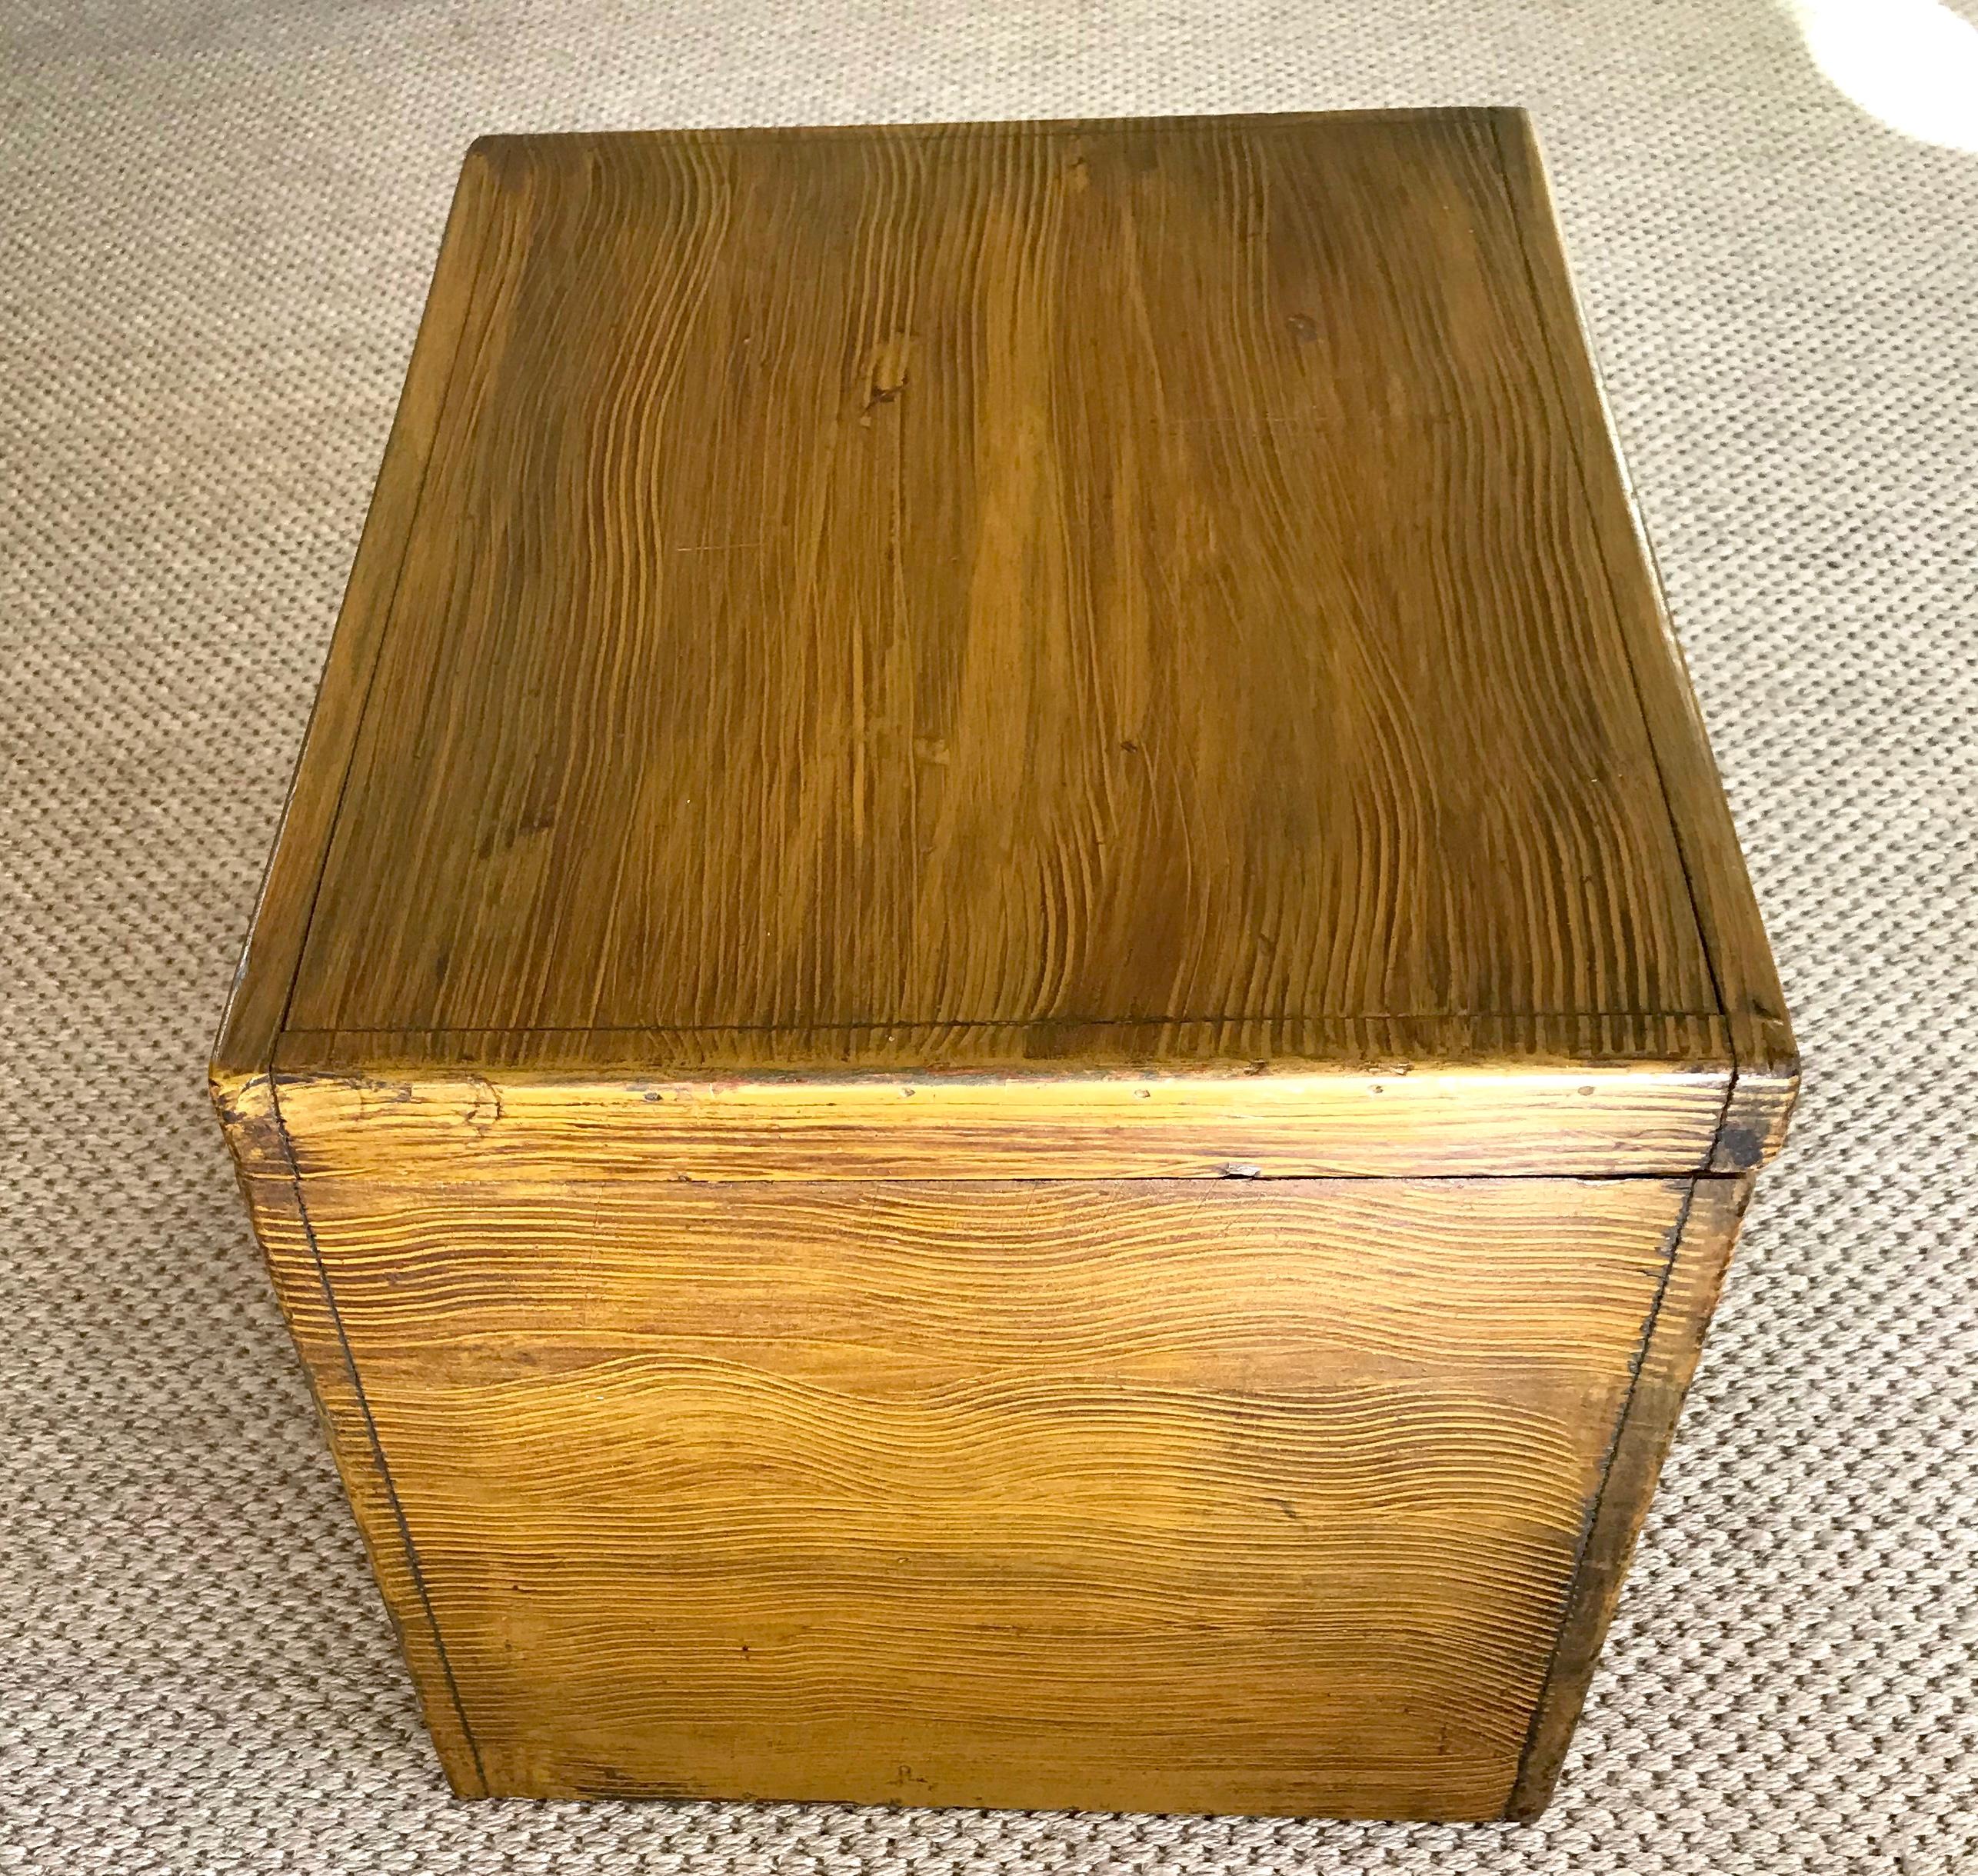 Yellow faux-bois pine box. Vintage American yellow wood-grain painted lidded chest with natural pine interior for storage and occasional coffee table. United States, early 20th century
Dimensions: 20